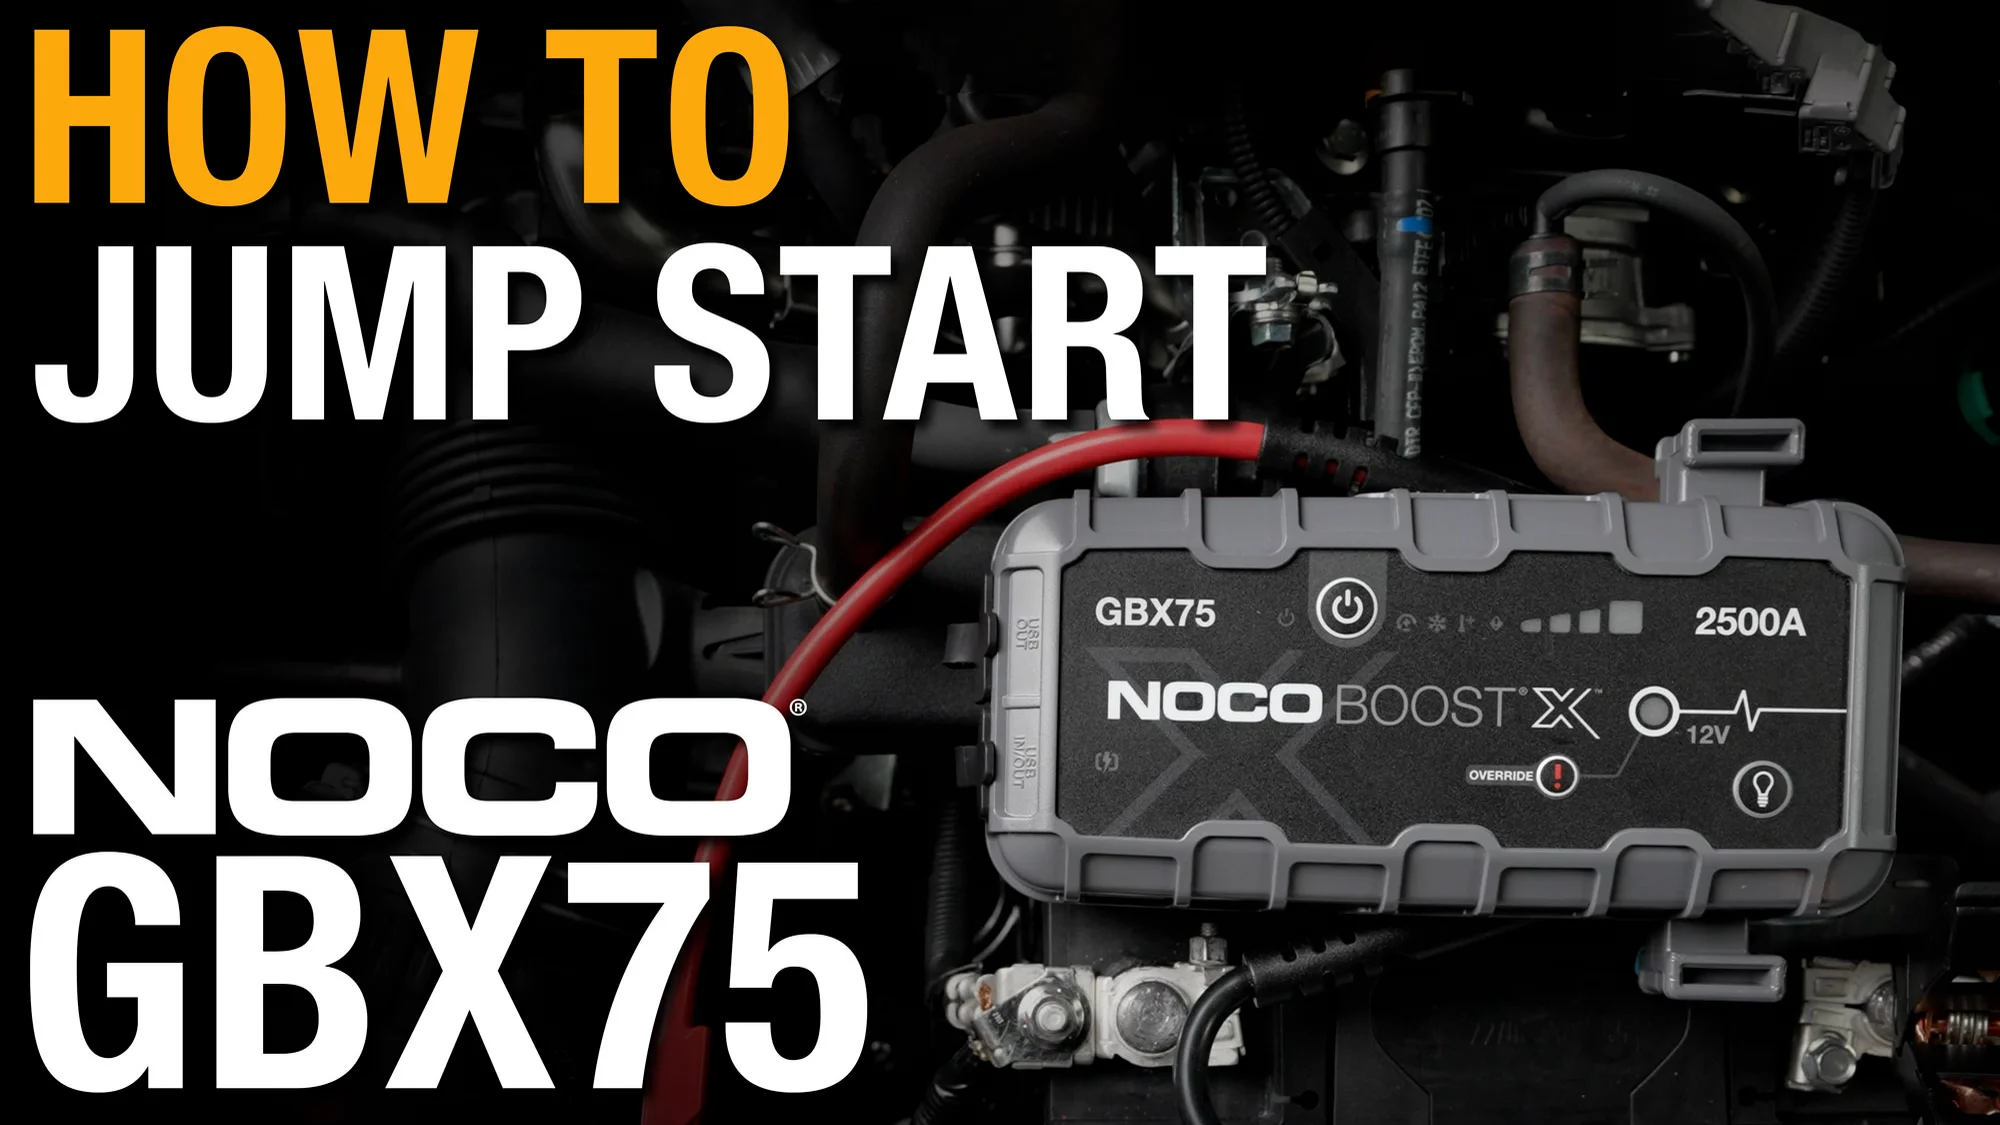 How to Jump Start using NOCO GBX75 on Vimeo